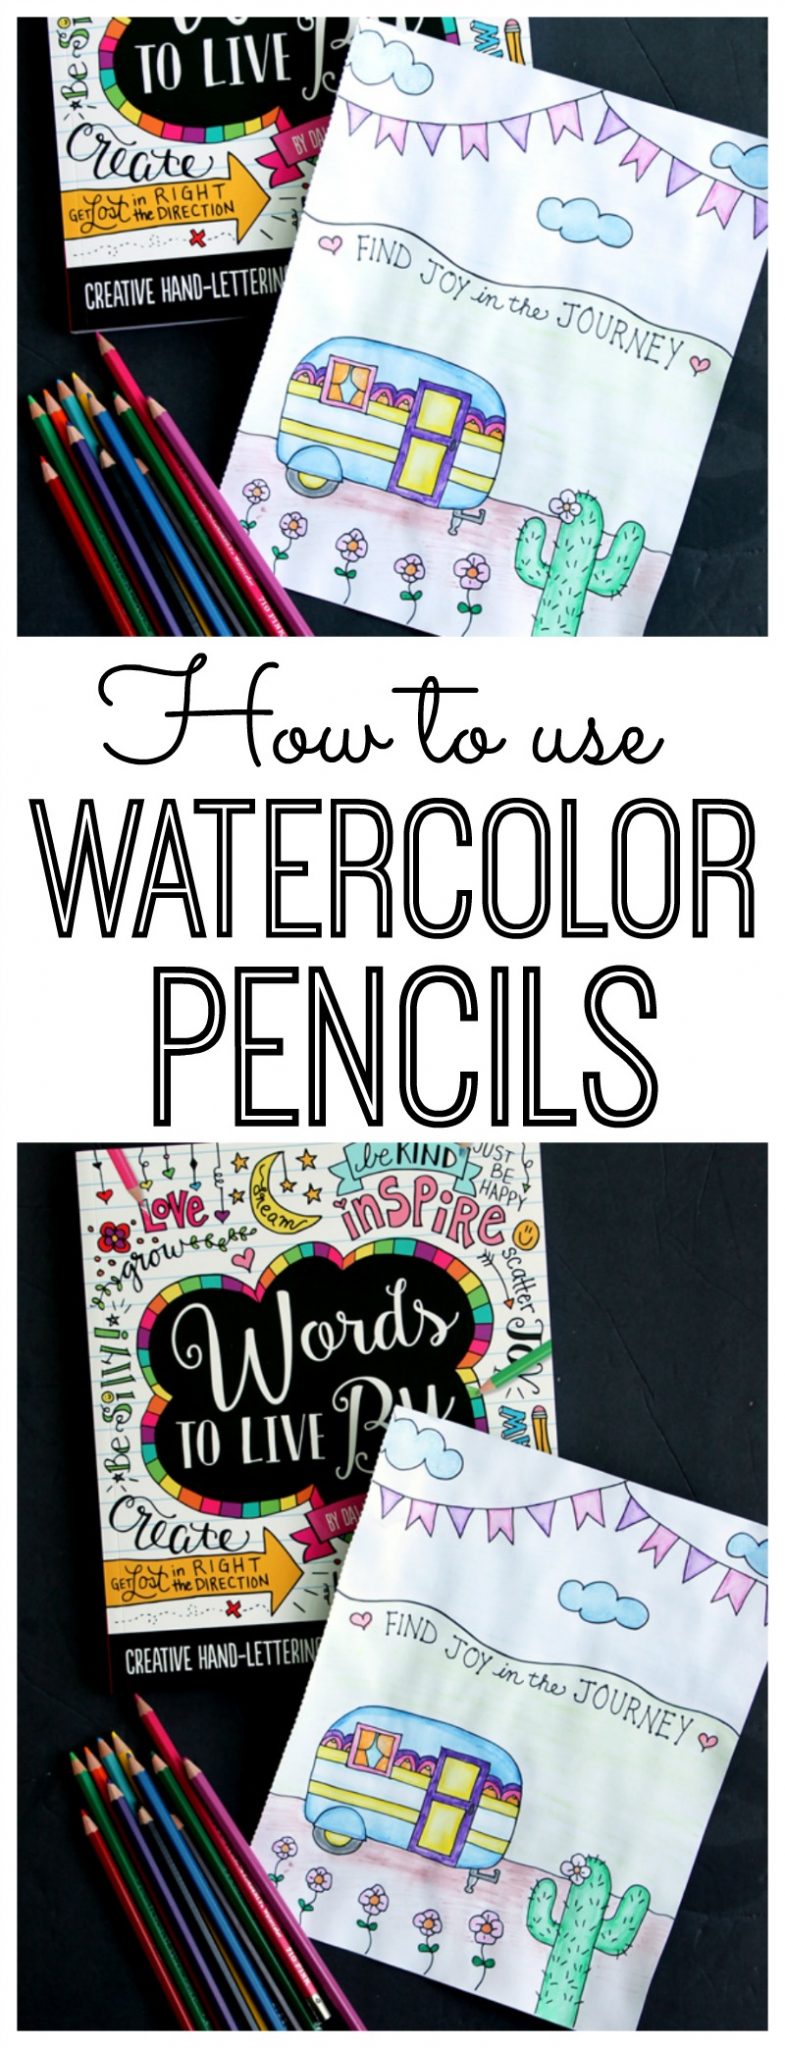 how to use watercolor pencils pin image